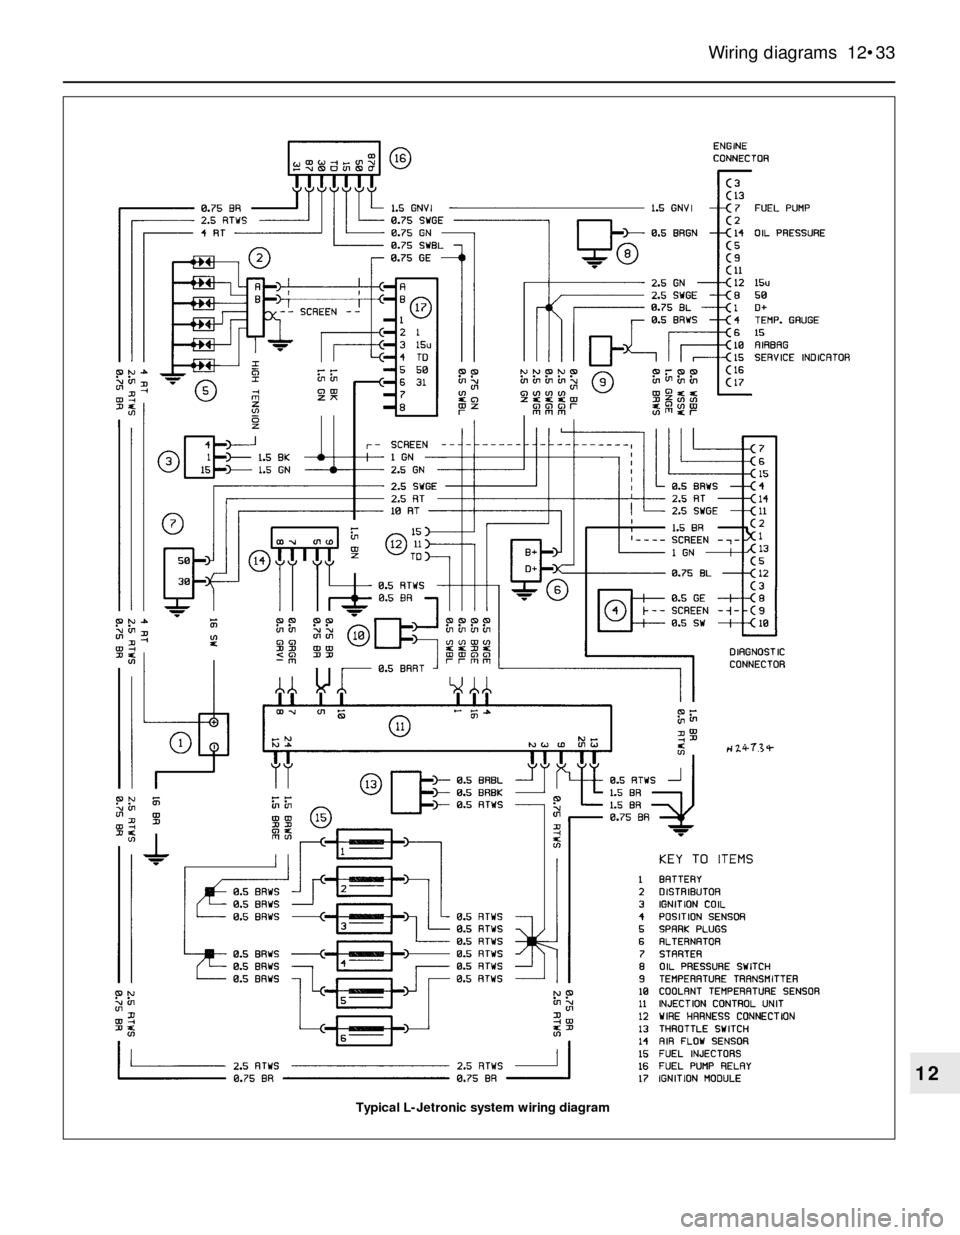 BMW 3 SERIES 1988 E30 Owners Manual Wiring diagrams  12•33
12
Typical L-Jetronic system wiring diagram 